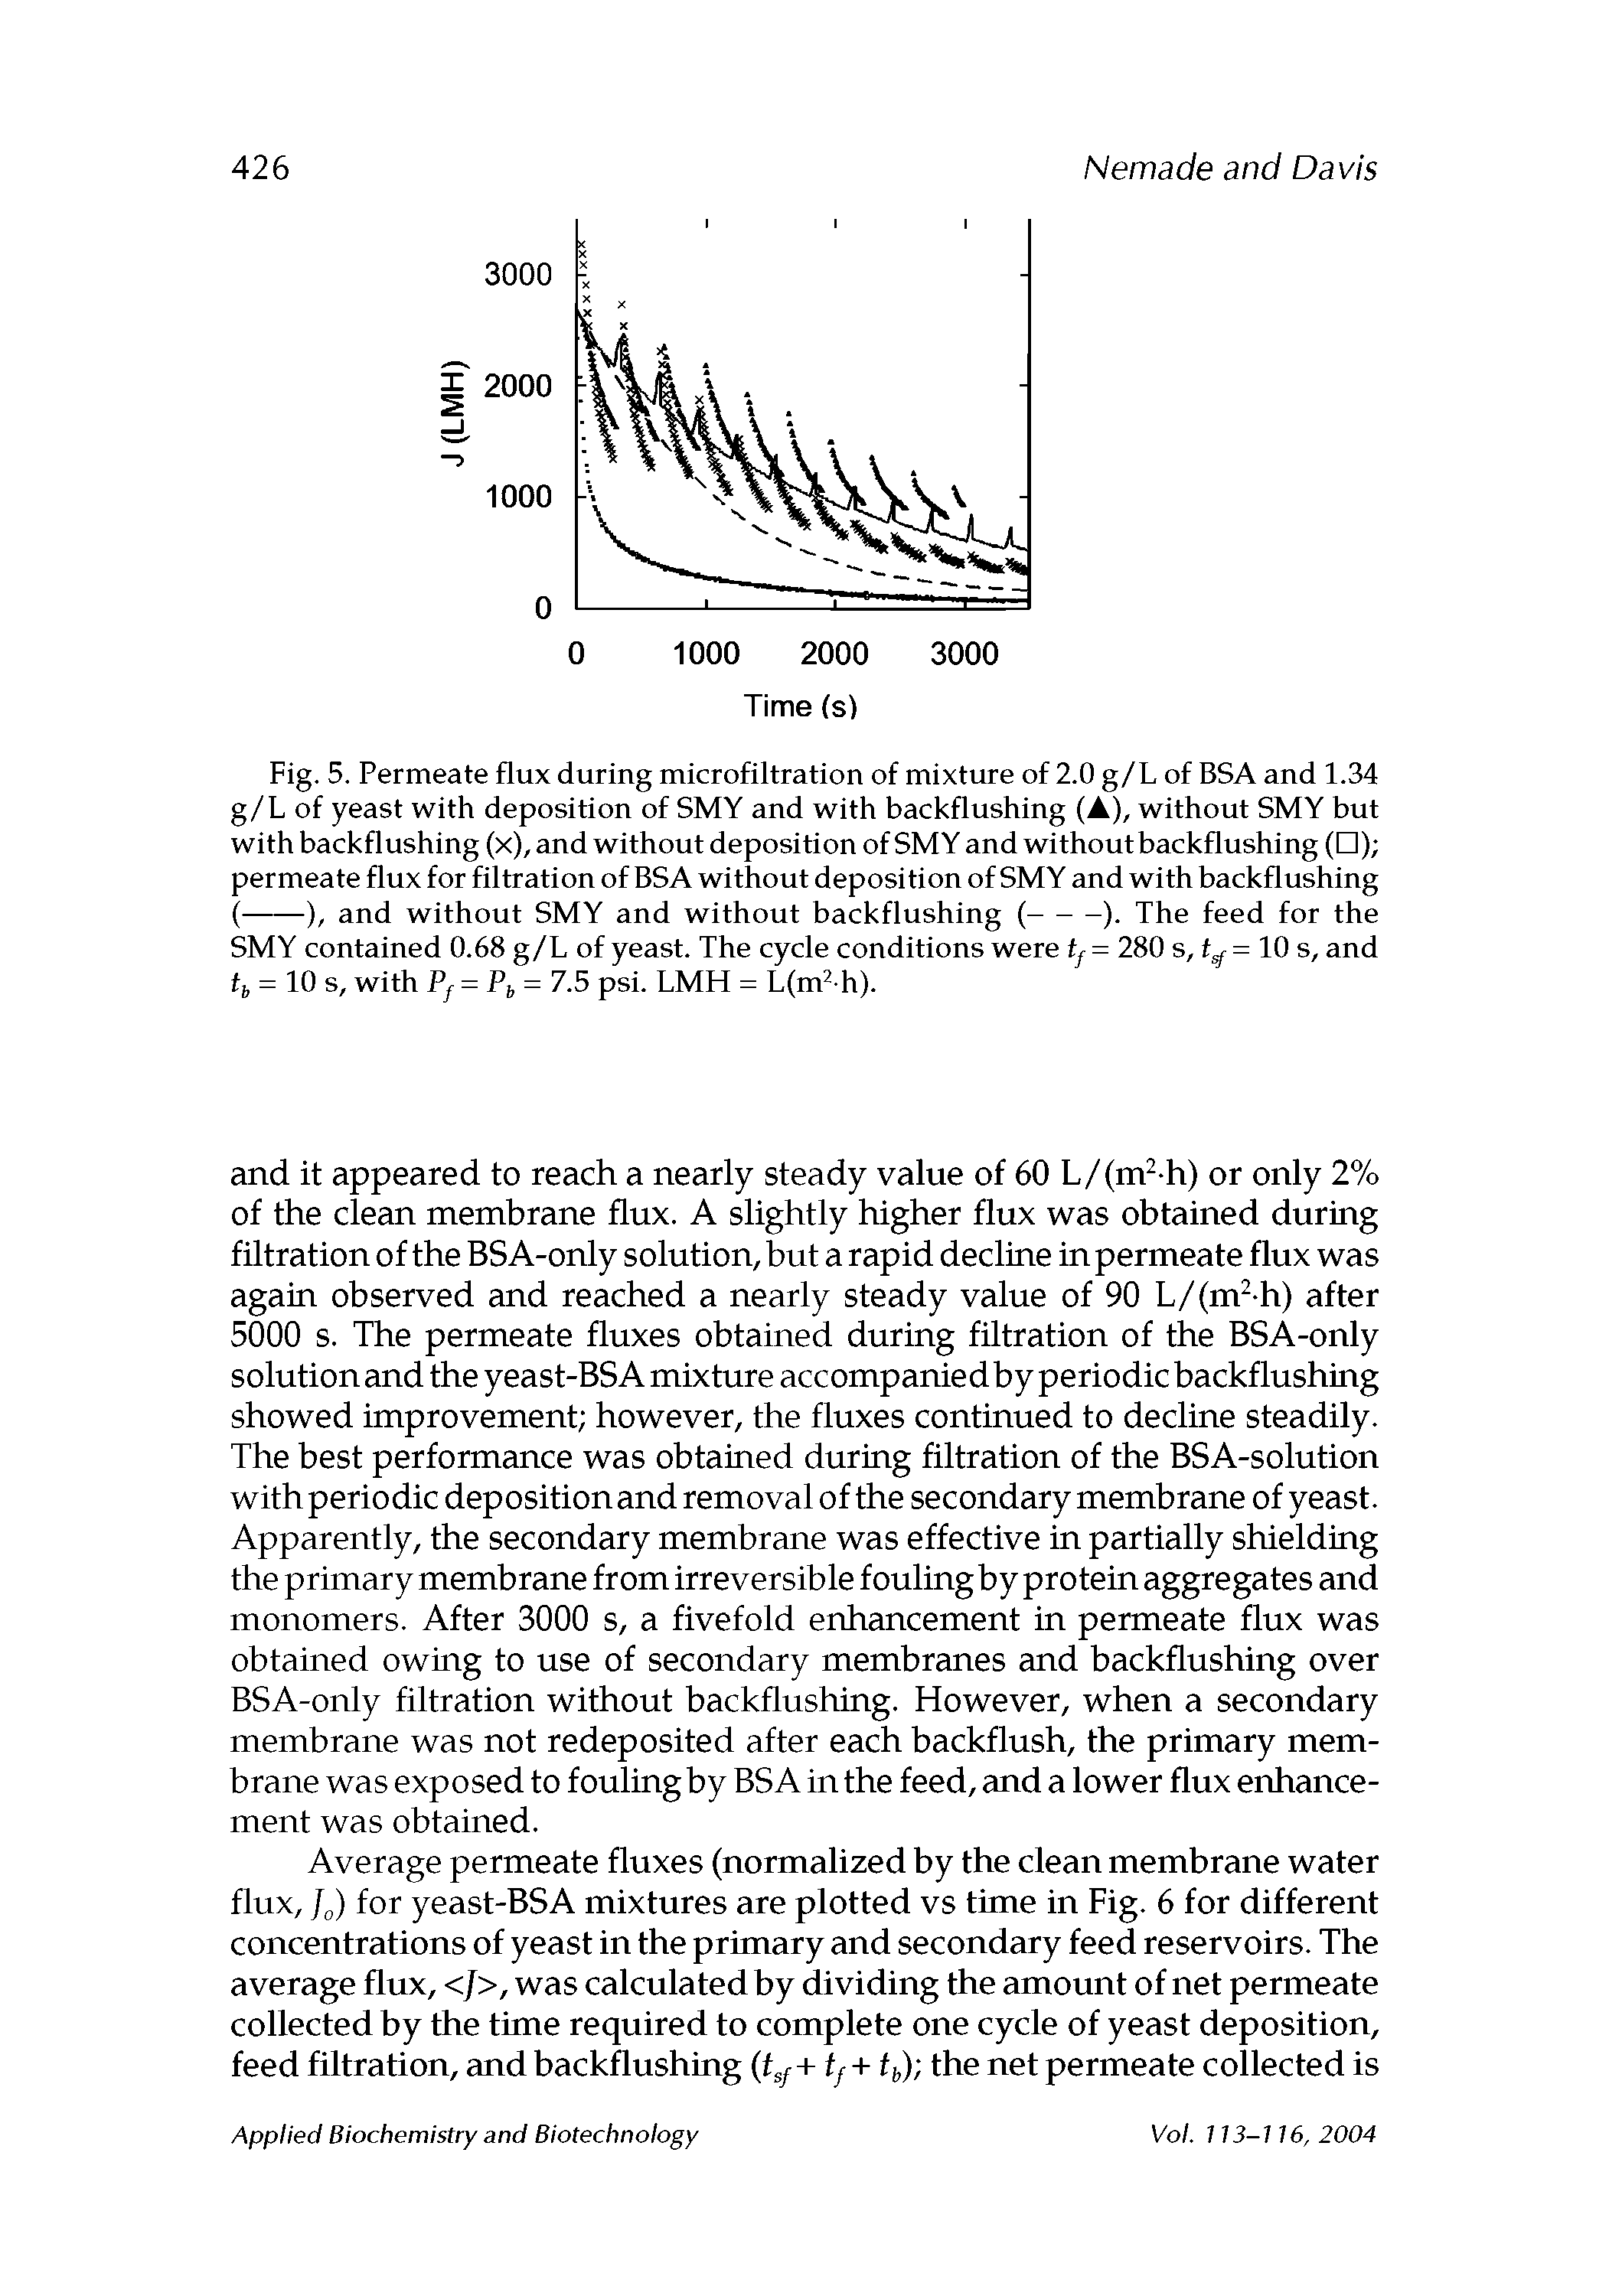 Fig. 5. Permeate flux during microfiltration of mixture of 2.0 g/L of BSA and 1.34 g/L of yeast with deposition of SMY and with backflushing (A), without SMY but with backflushing (x), and without deposition of SMY and without backflushing ( ) permeate flux for filtration of BSA without deposition of SMY and with backflushing...